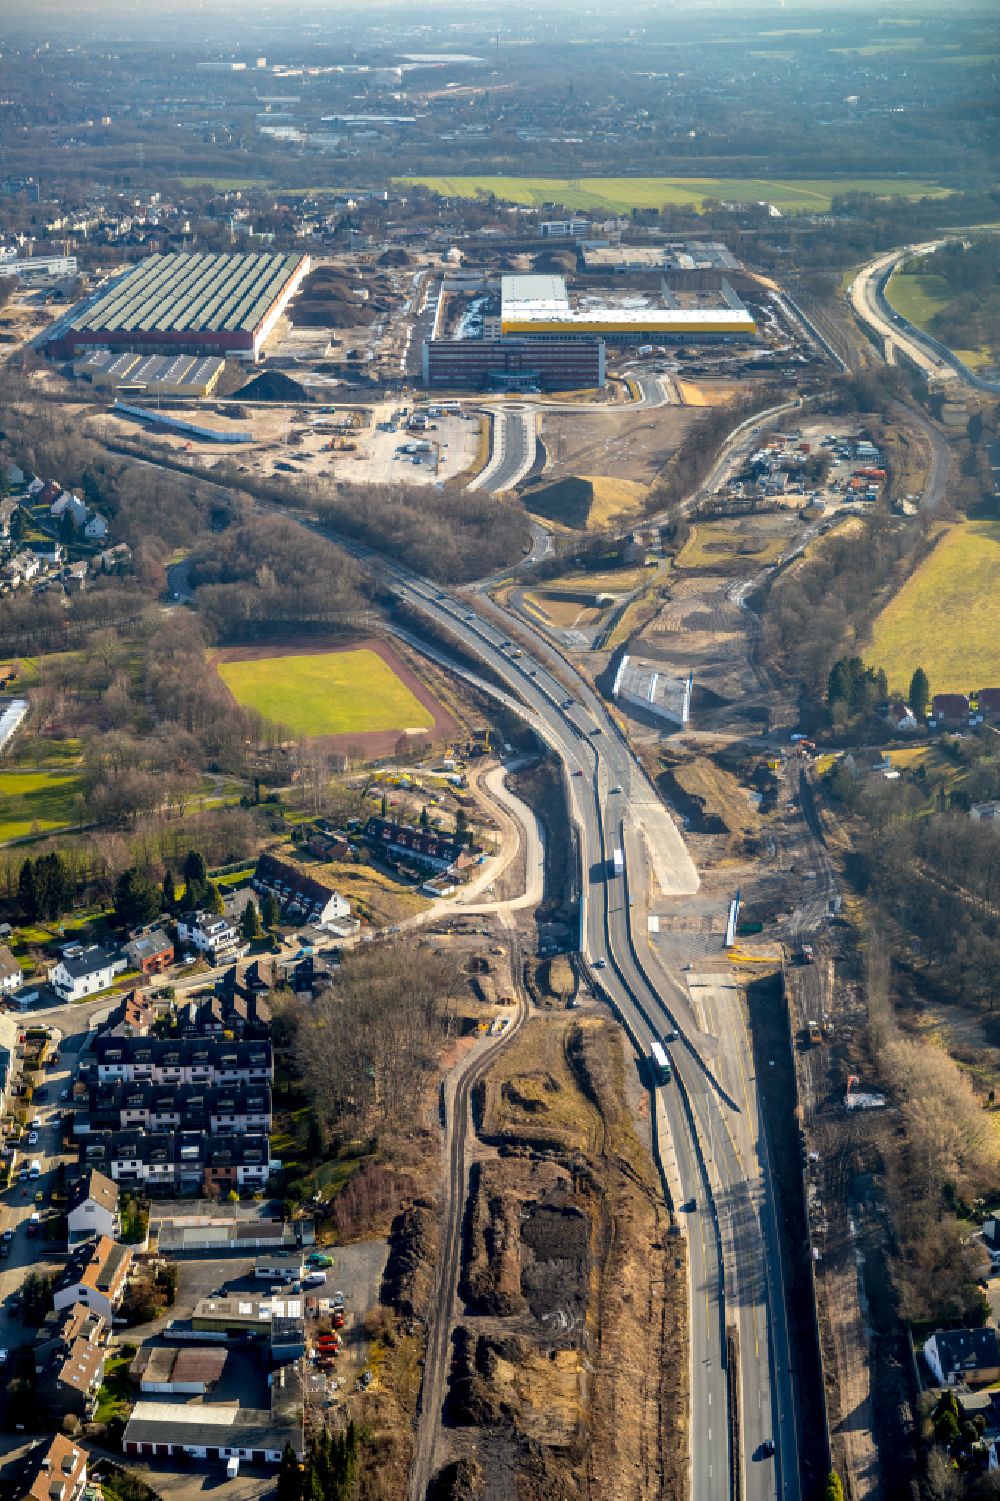 Bochum from above - Highway construction site for the expansion and extension of track along the route of A44 in Bochum in the state North Rhine-Westphalia, Germany